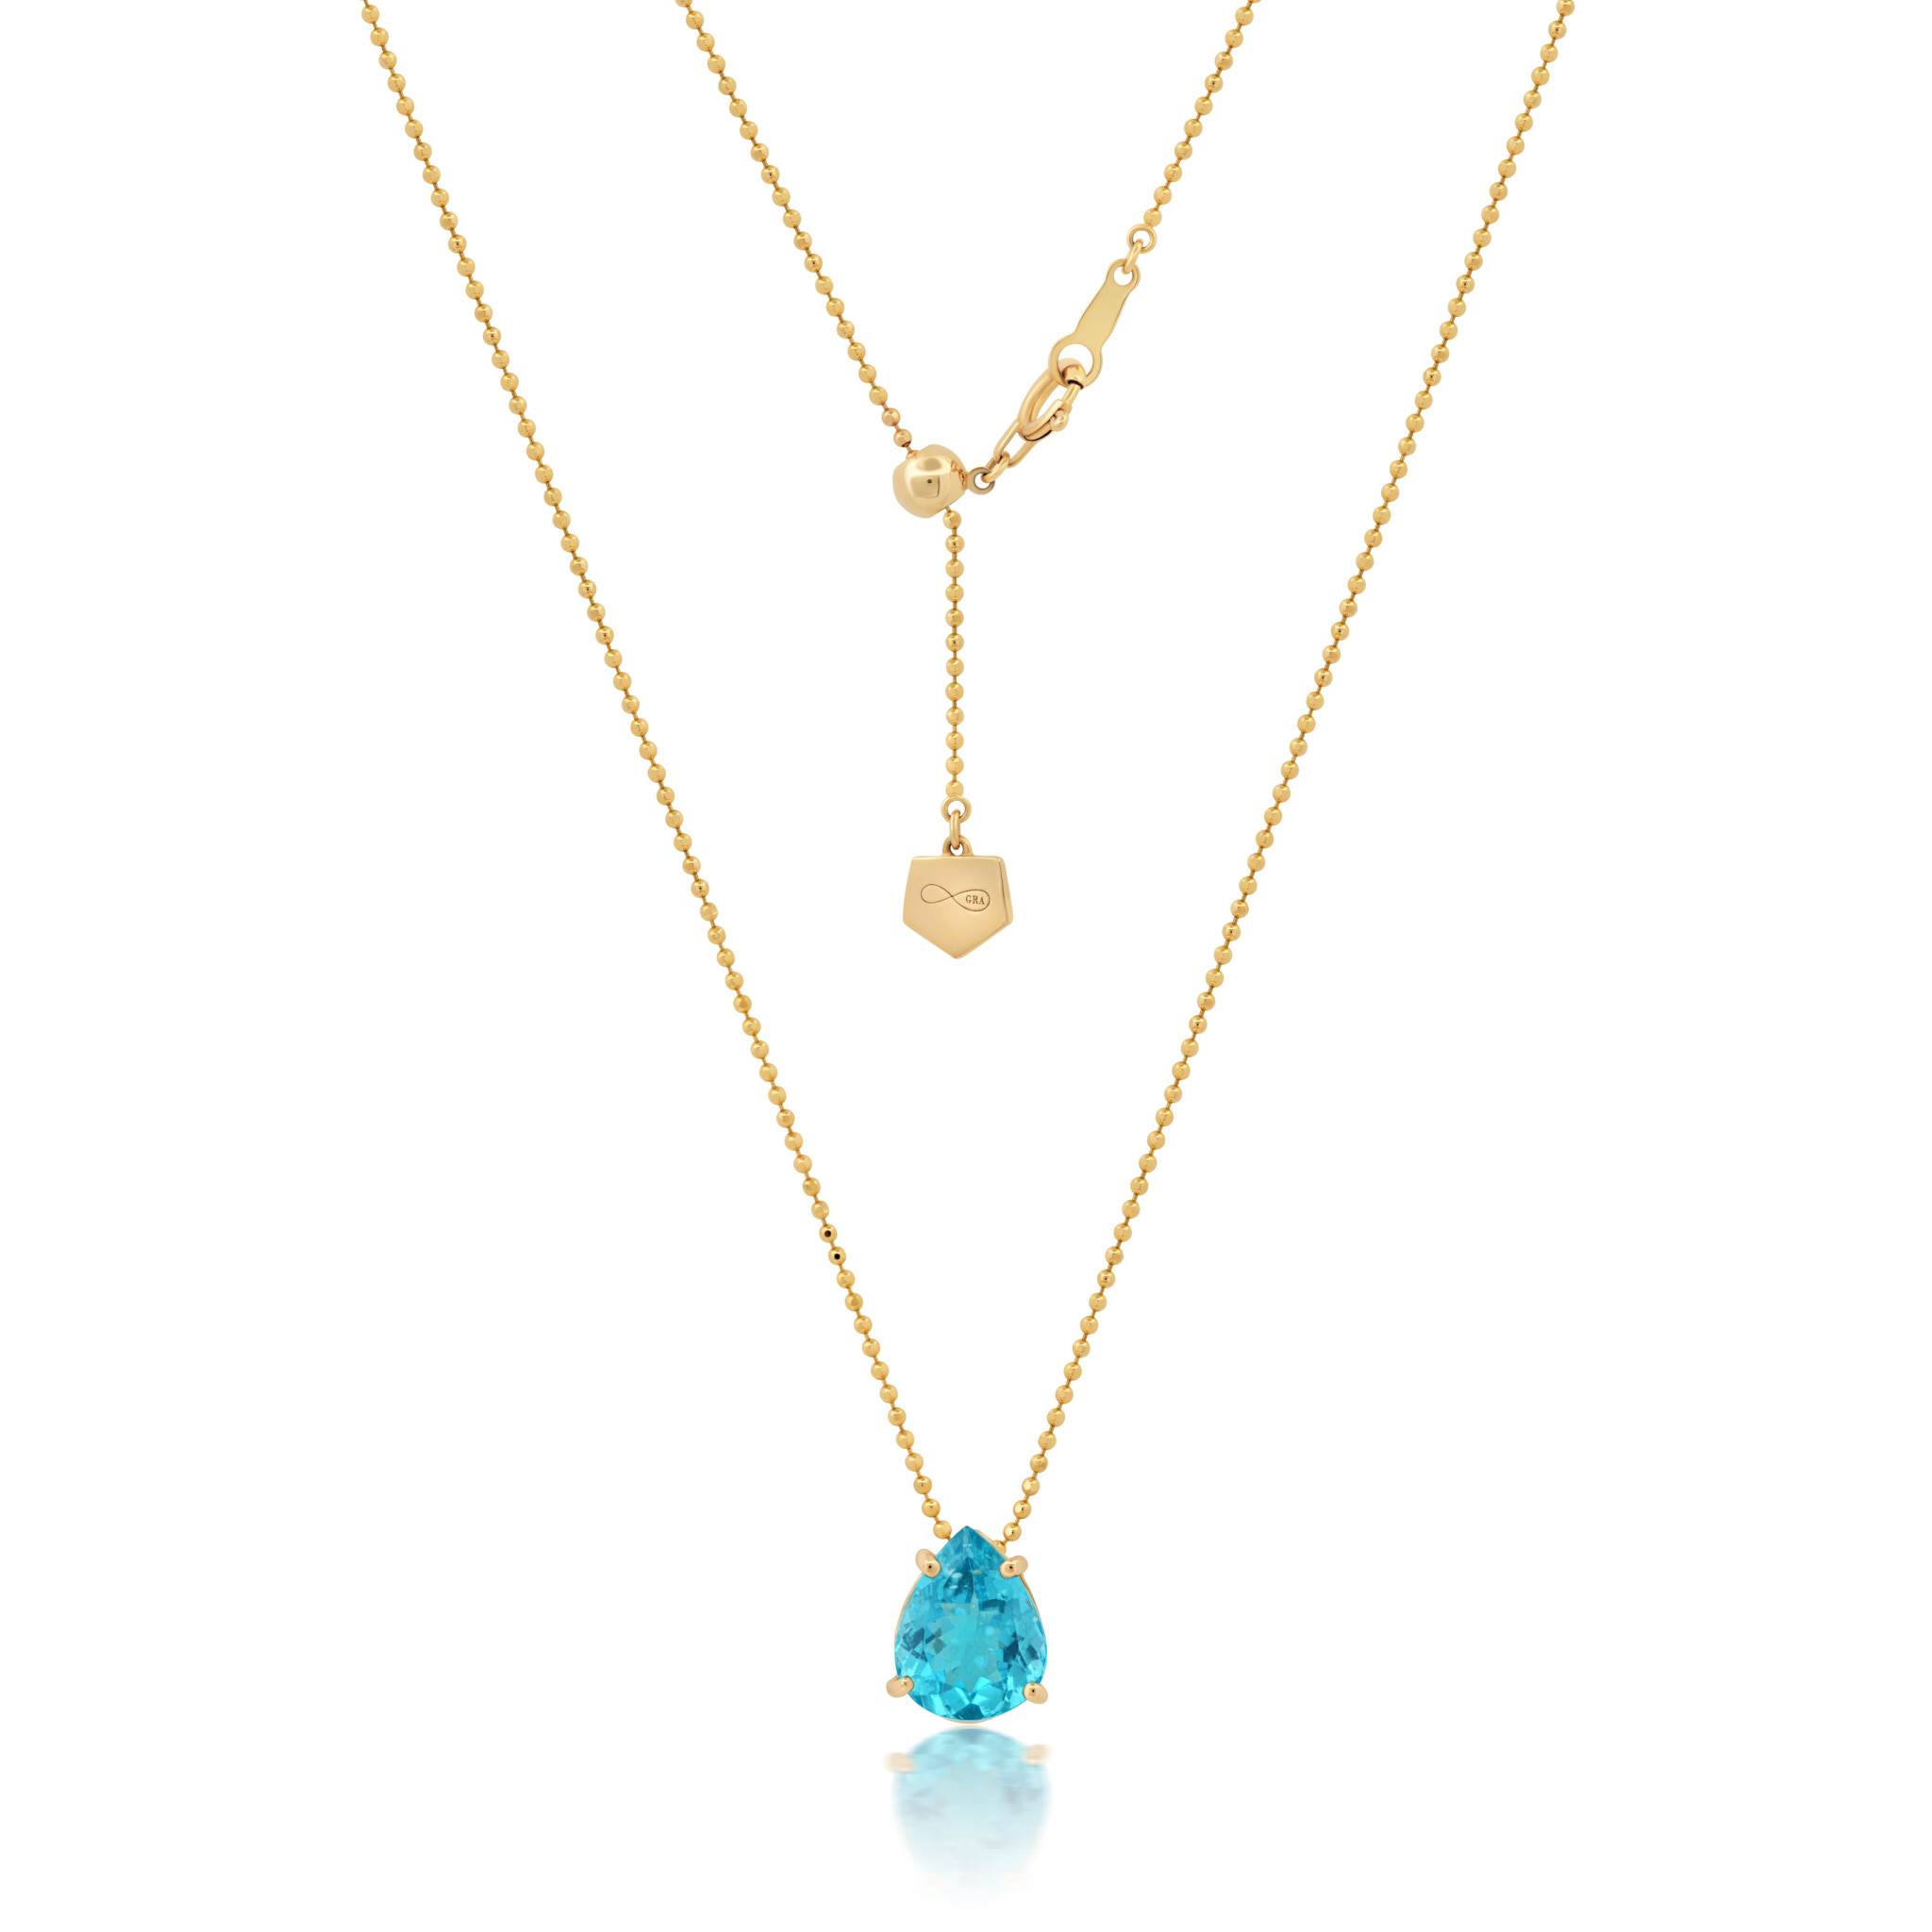 Graziela Gems - Necklace - 18" Pear Shaped Apatite Drop Necklace - Yellow Gold